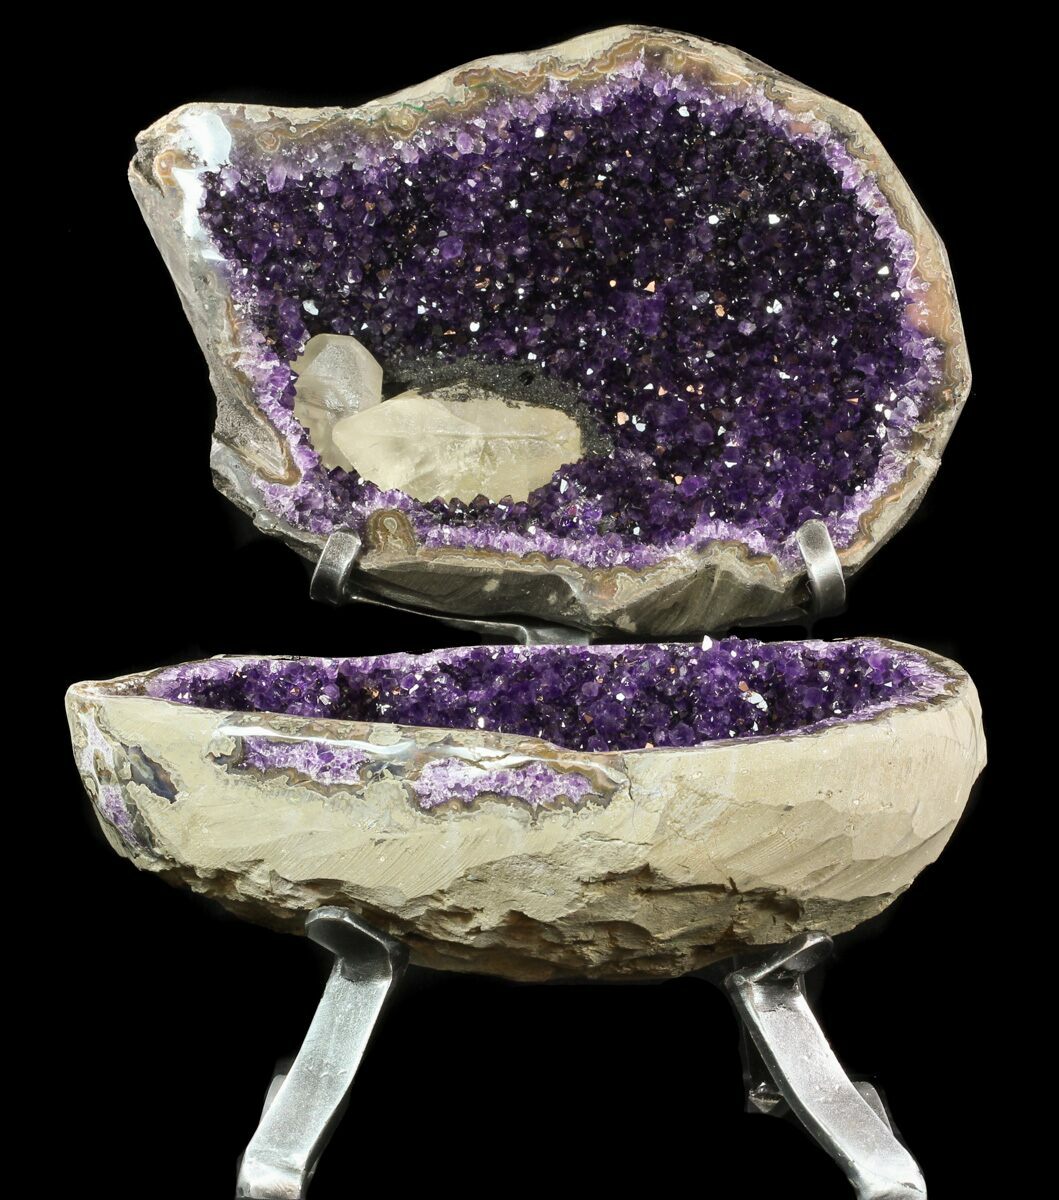 Amazing Amethyst Geode Display On Stand - Gorgeous (#50982) For Sale ...